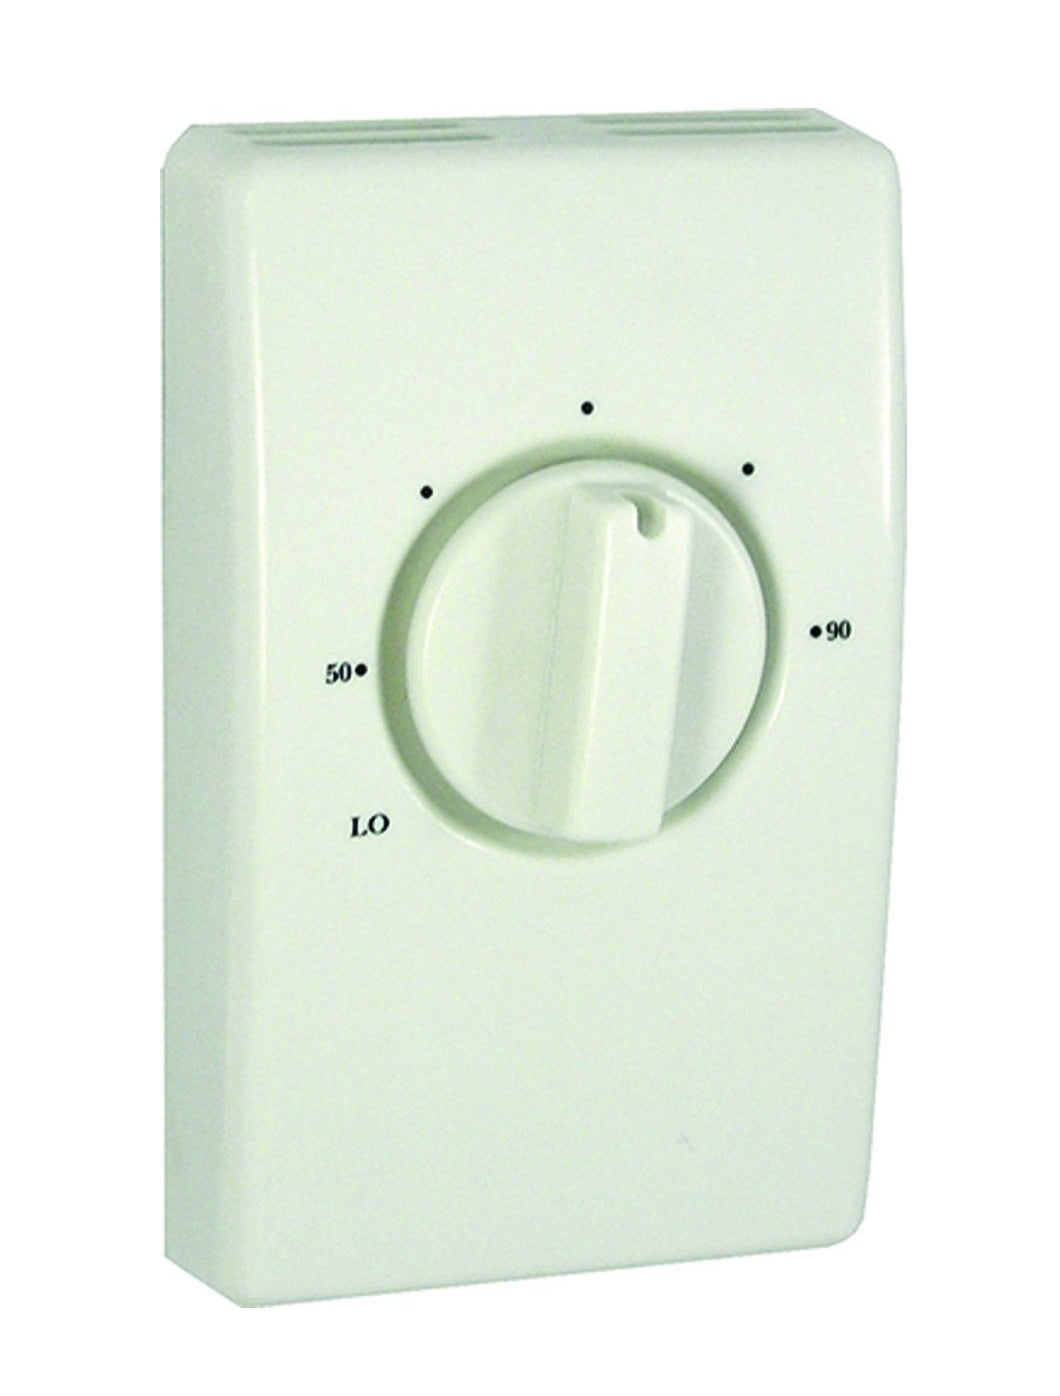 buy standard thermostats at cheap rate in bulk. wholesale & retail heat & cooling parts & supplies store.